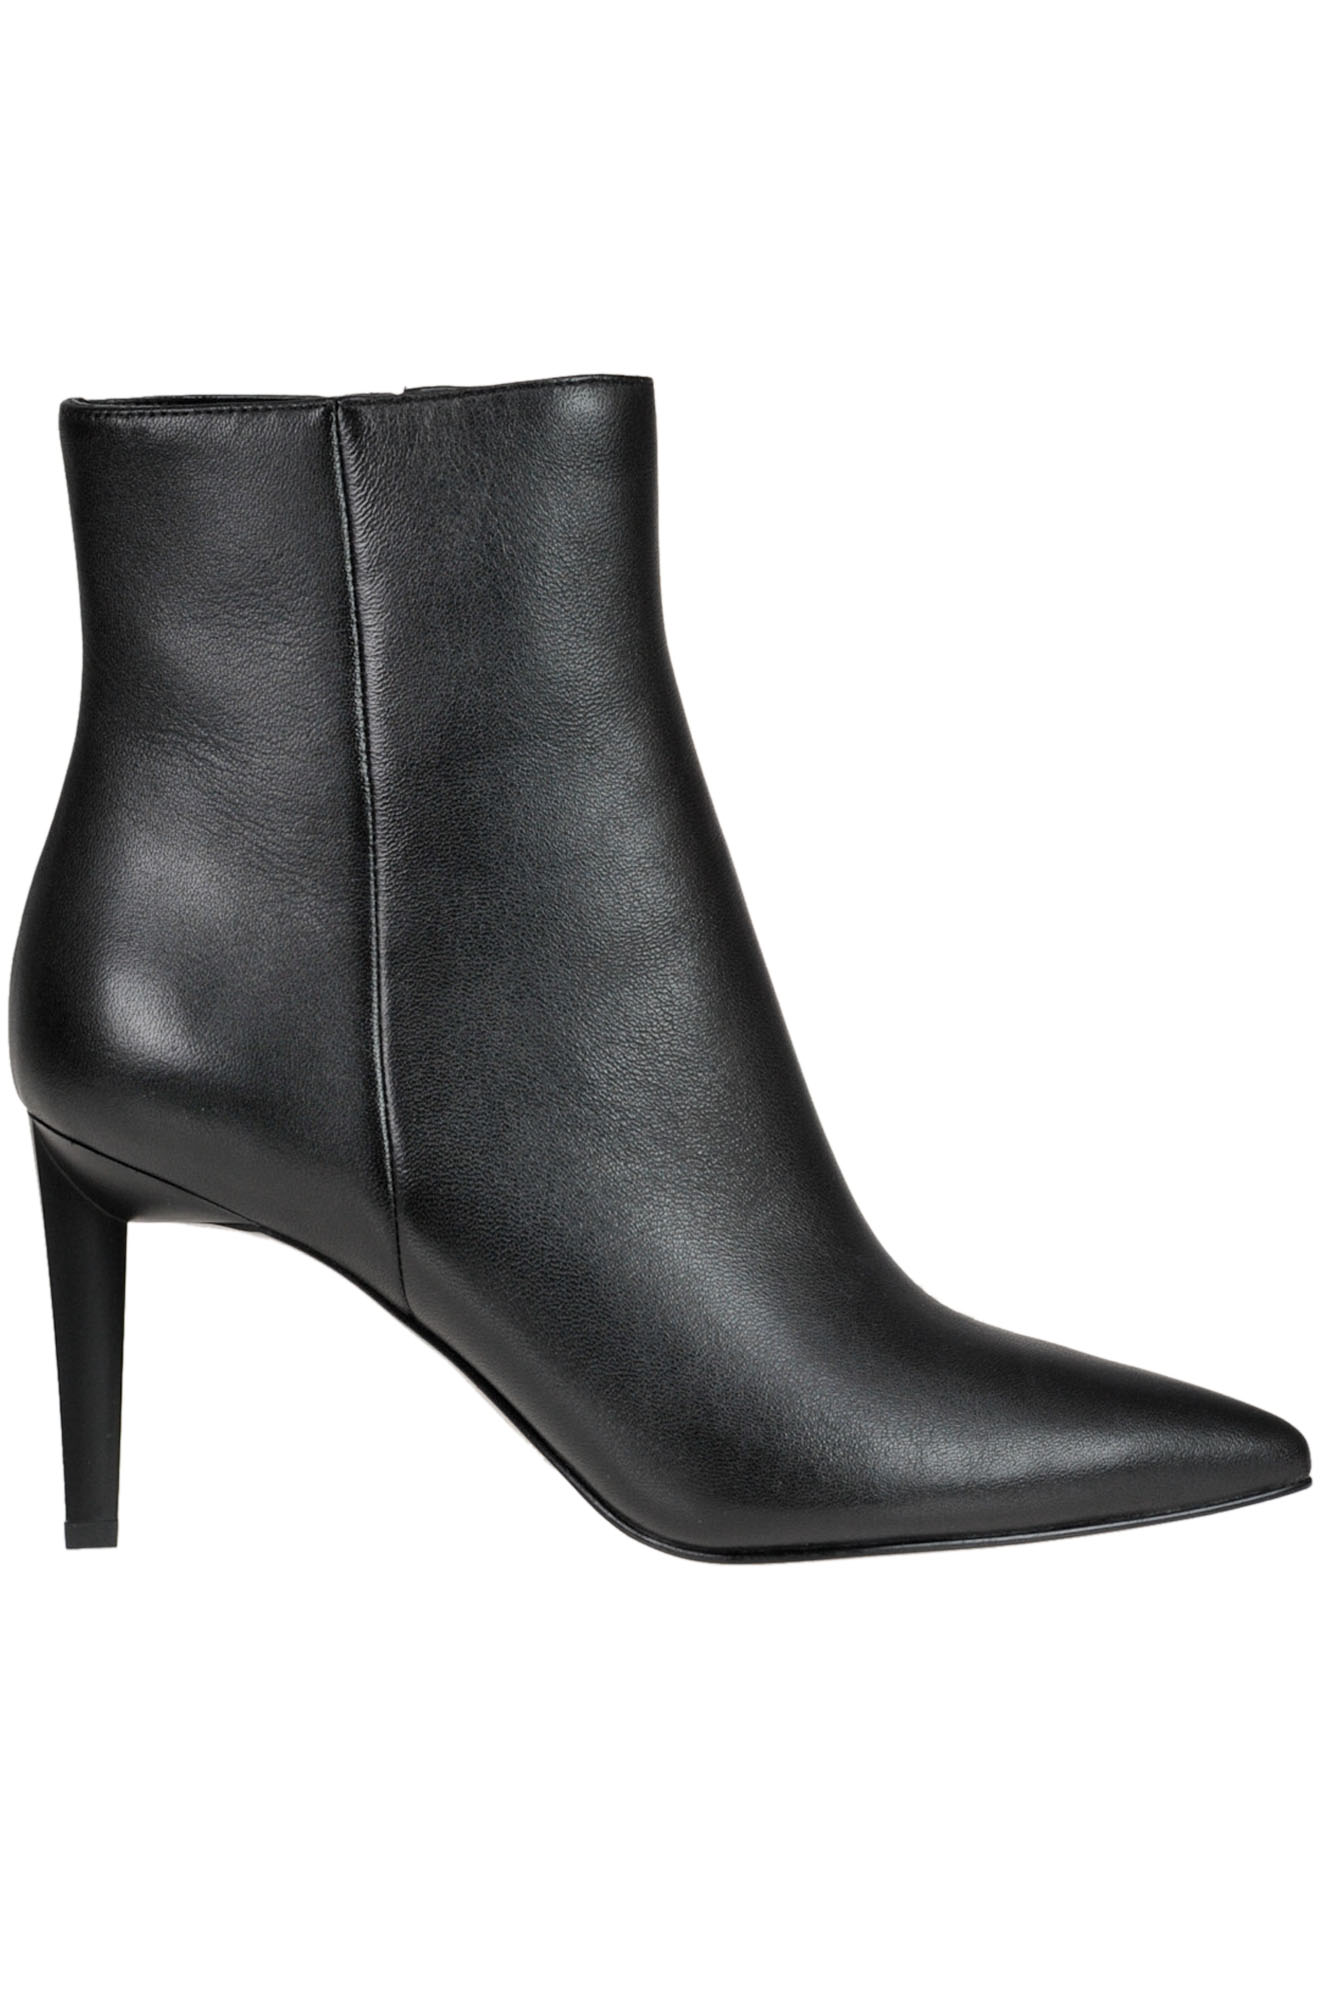 KENDALL + KYLIE LEATHER ANKLE-BOOTS